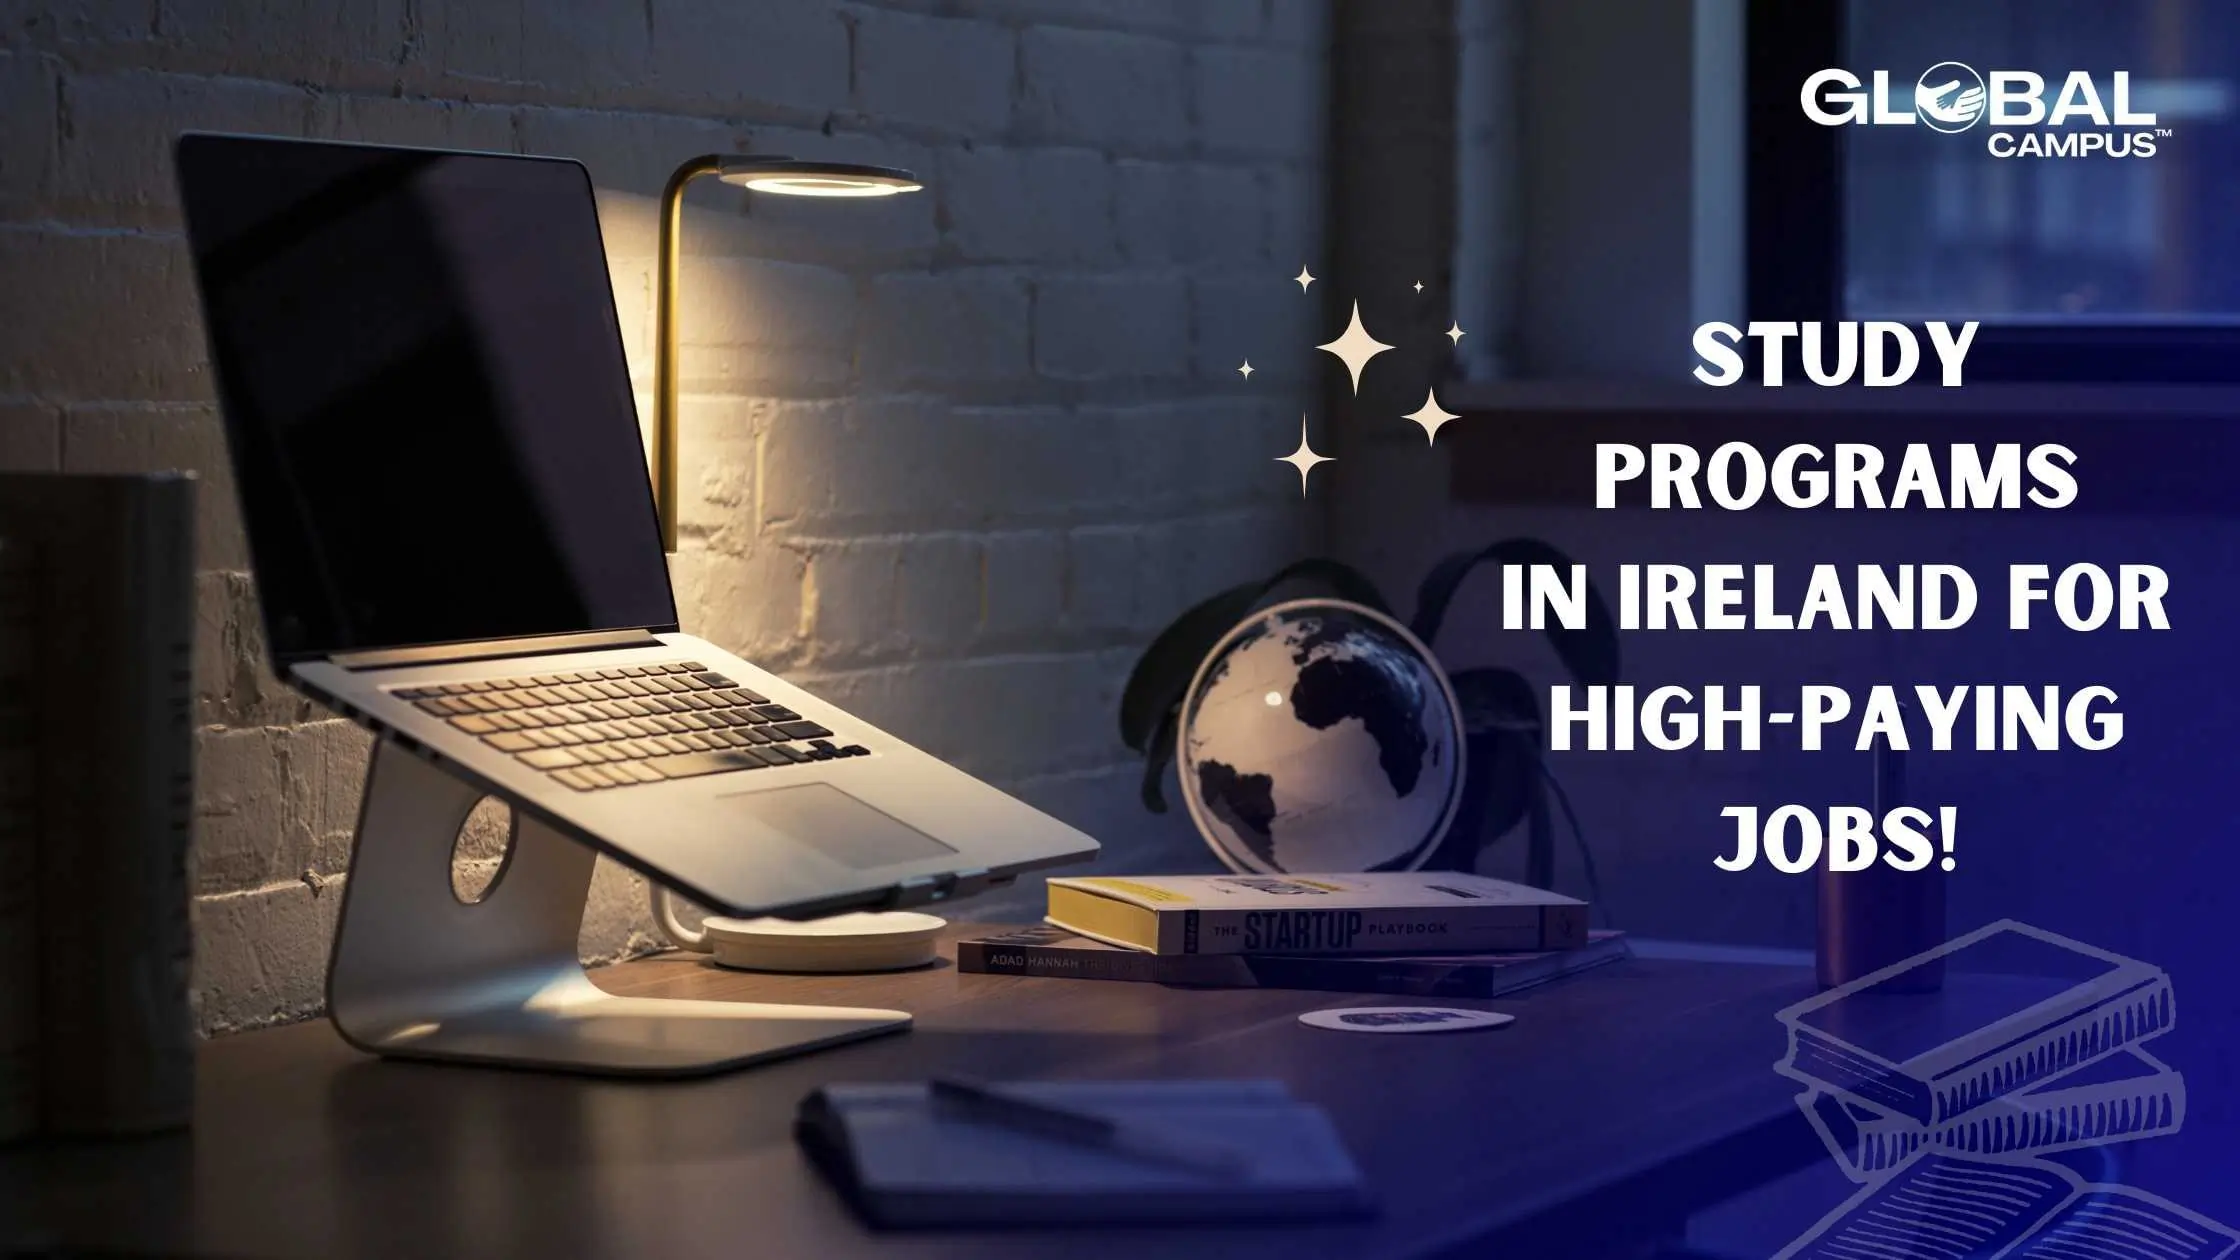 Study Programs in Ireland that Lead to High-Paying Jobs.